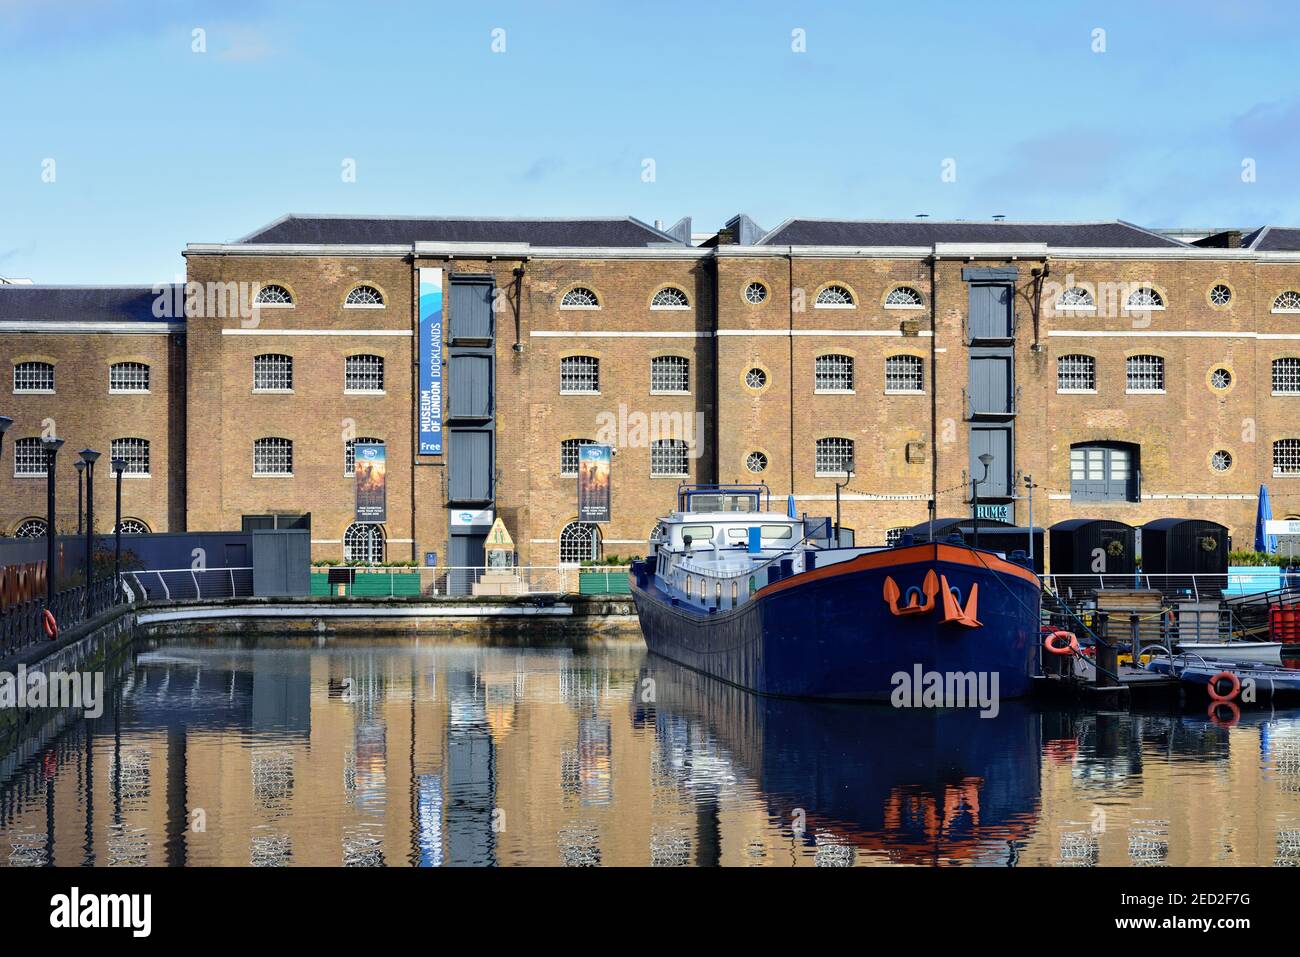 Museum of London Docklands, West India Quay, North Dock, Canary Wharf, Docklands, Londres, Royaume-Uni Banque D'Images